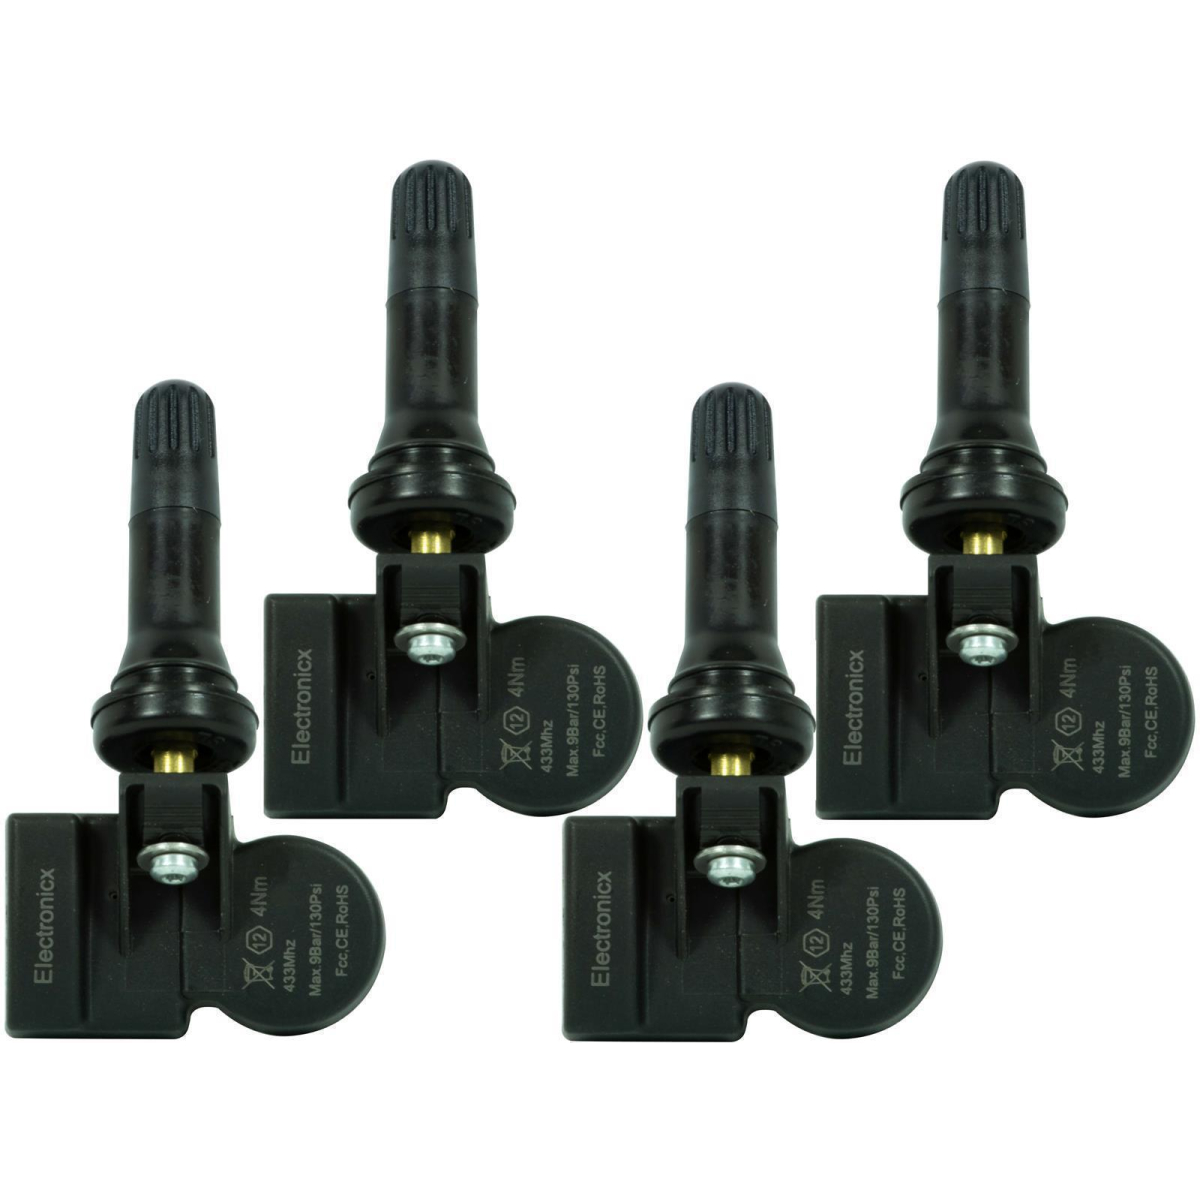 4x RDKS TPMS tire pressure sensors rubber valve for Buick Cadillac Opel Vauxhall